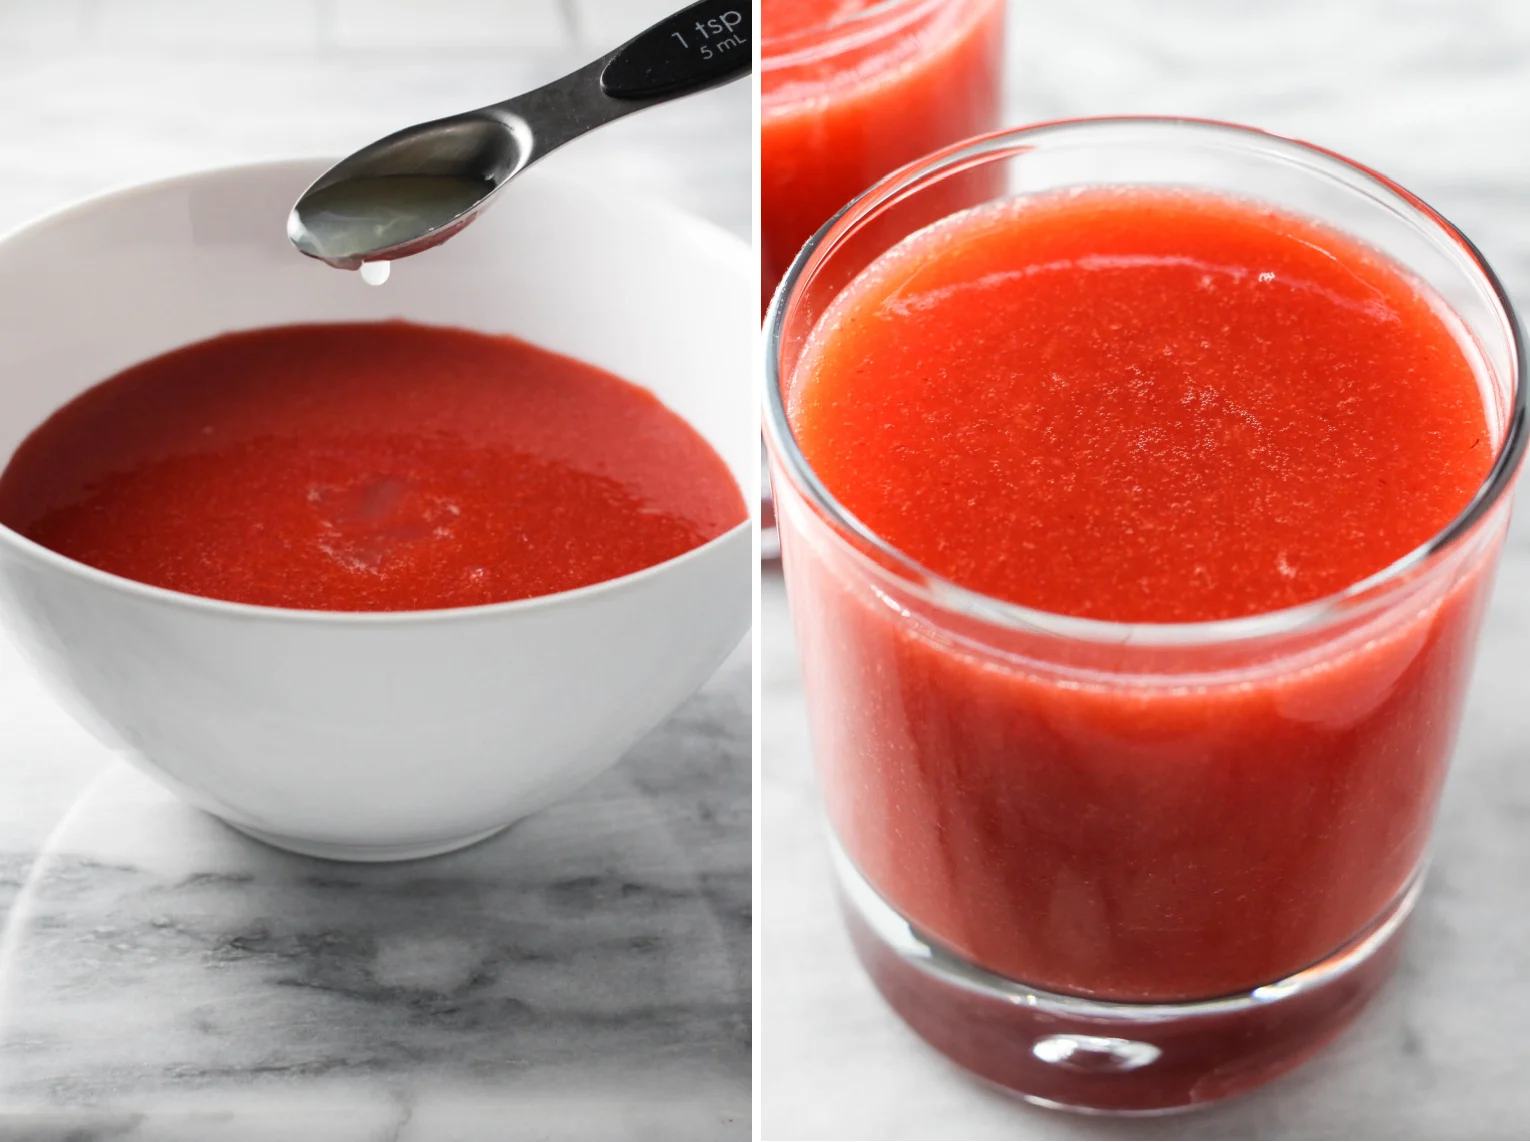 Two side-by-side images. On the left image, lime juice being added to the strawberry juice in a bowl. On the right image, strawberry juice in a glass.